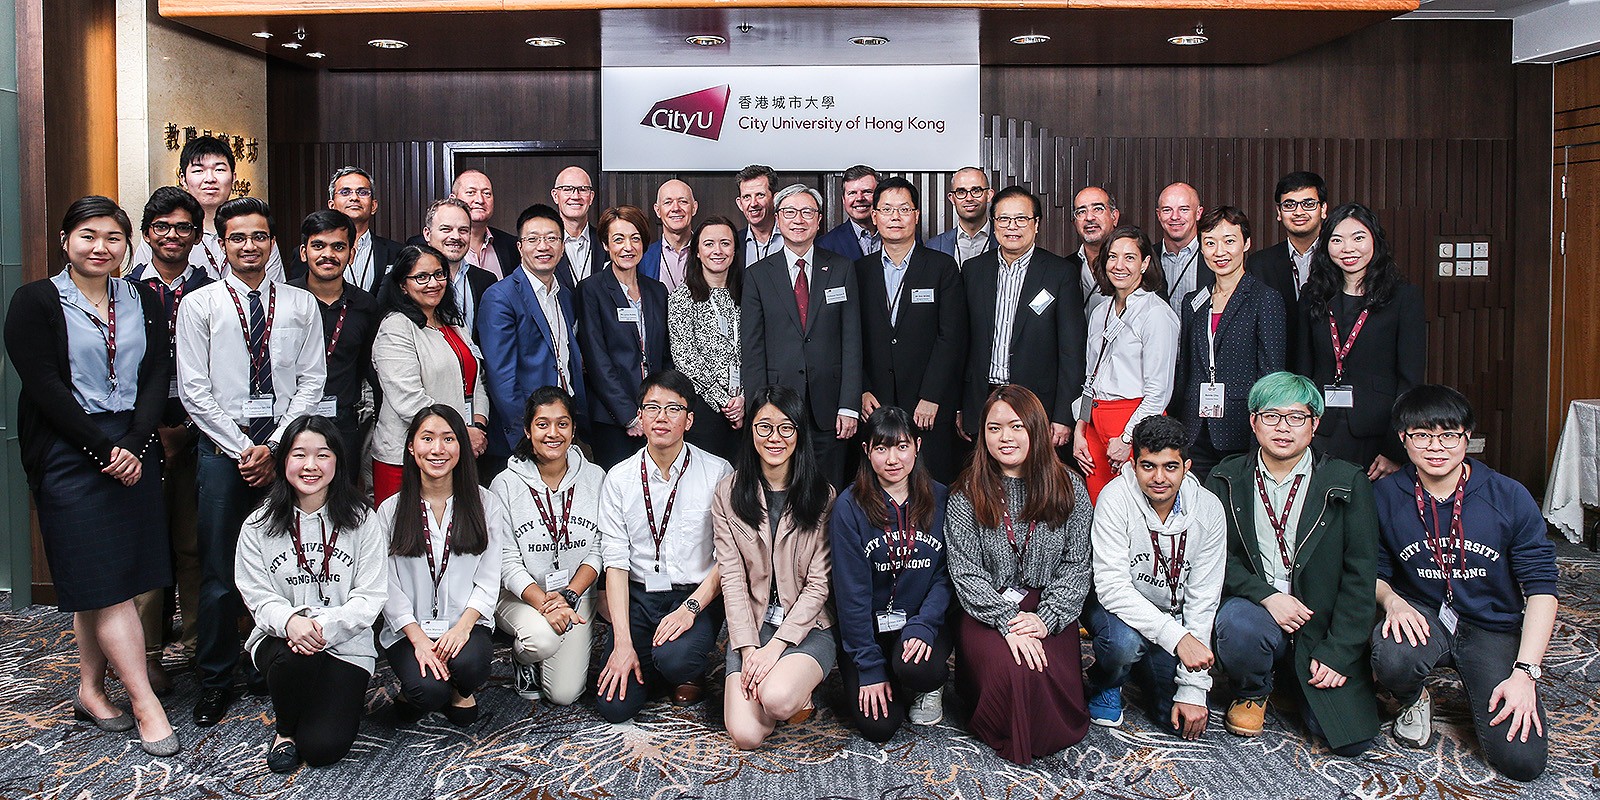 Professor Ip (2nd row, 6th from right) thanked the HSBC delegation for holding high level dialogues with CityU students and alumni.